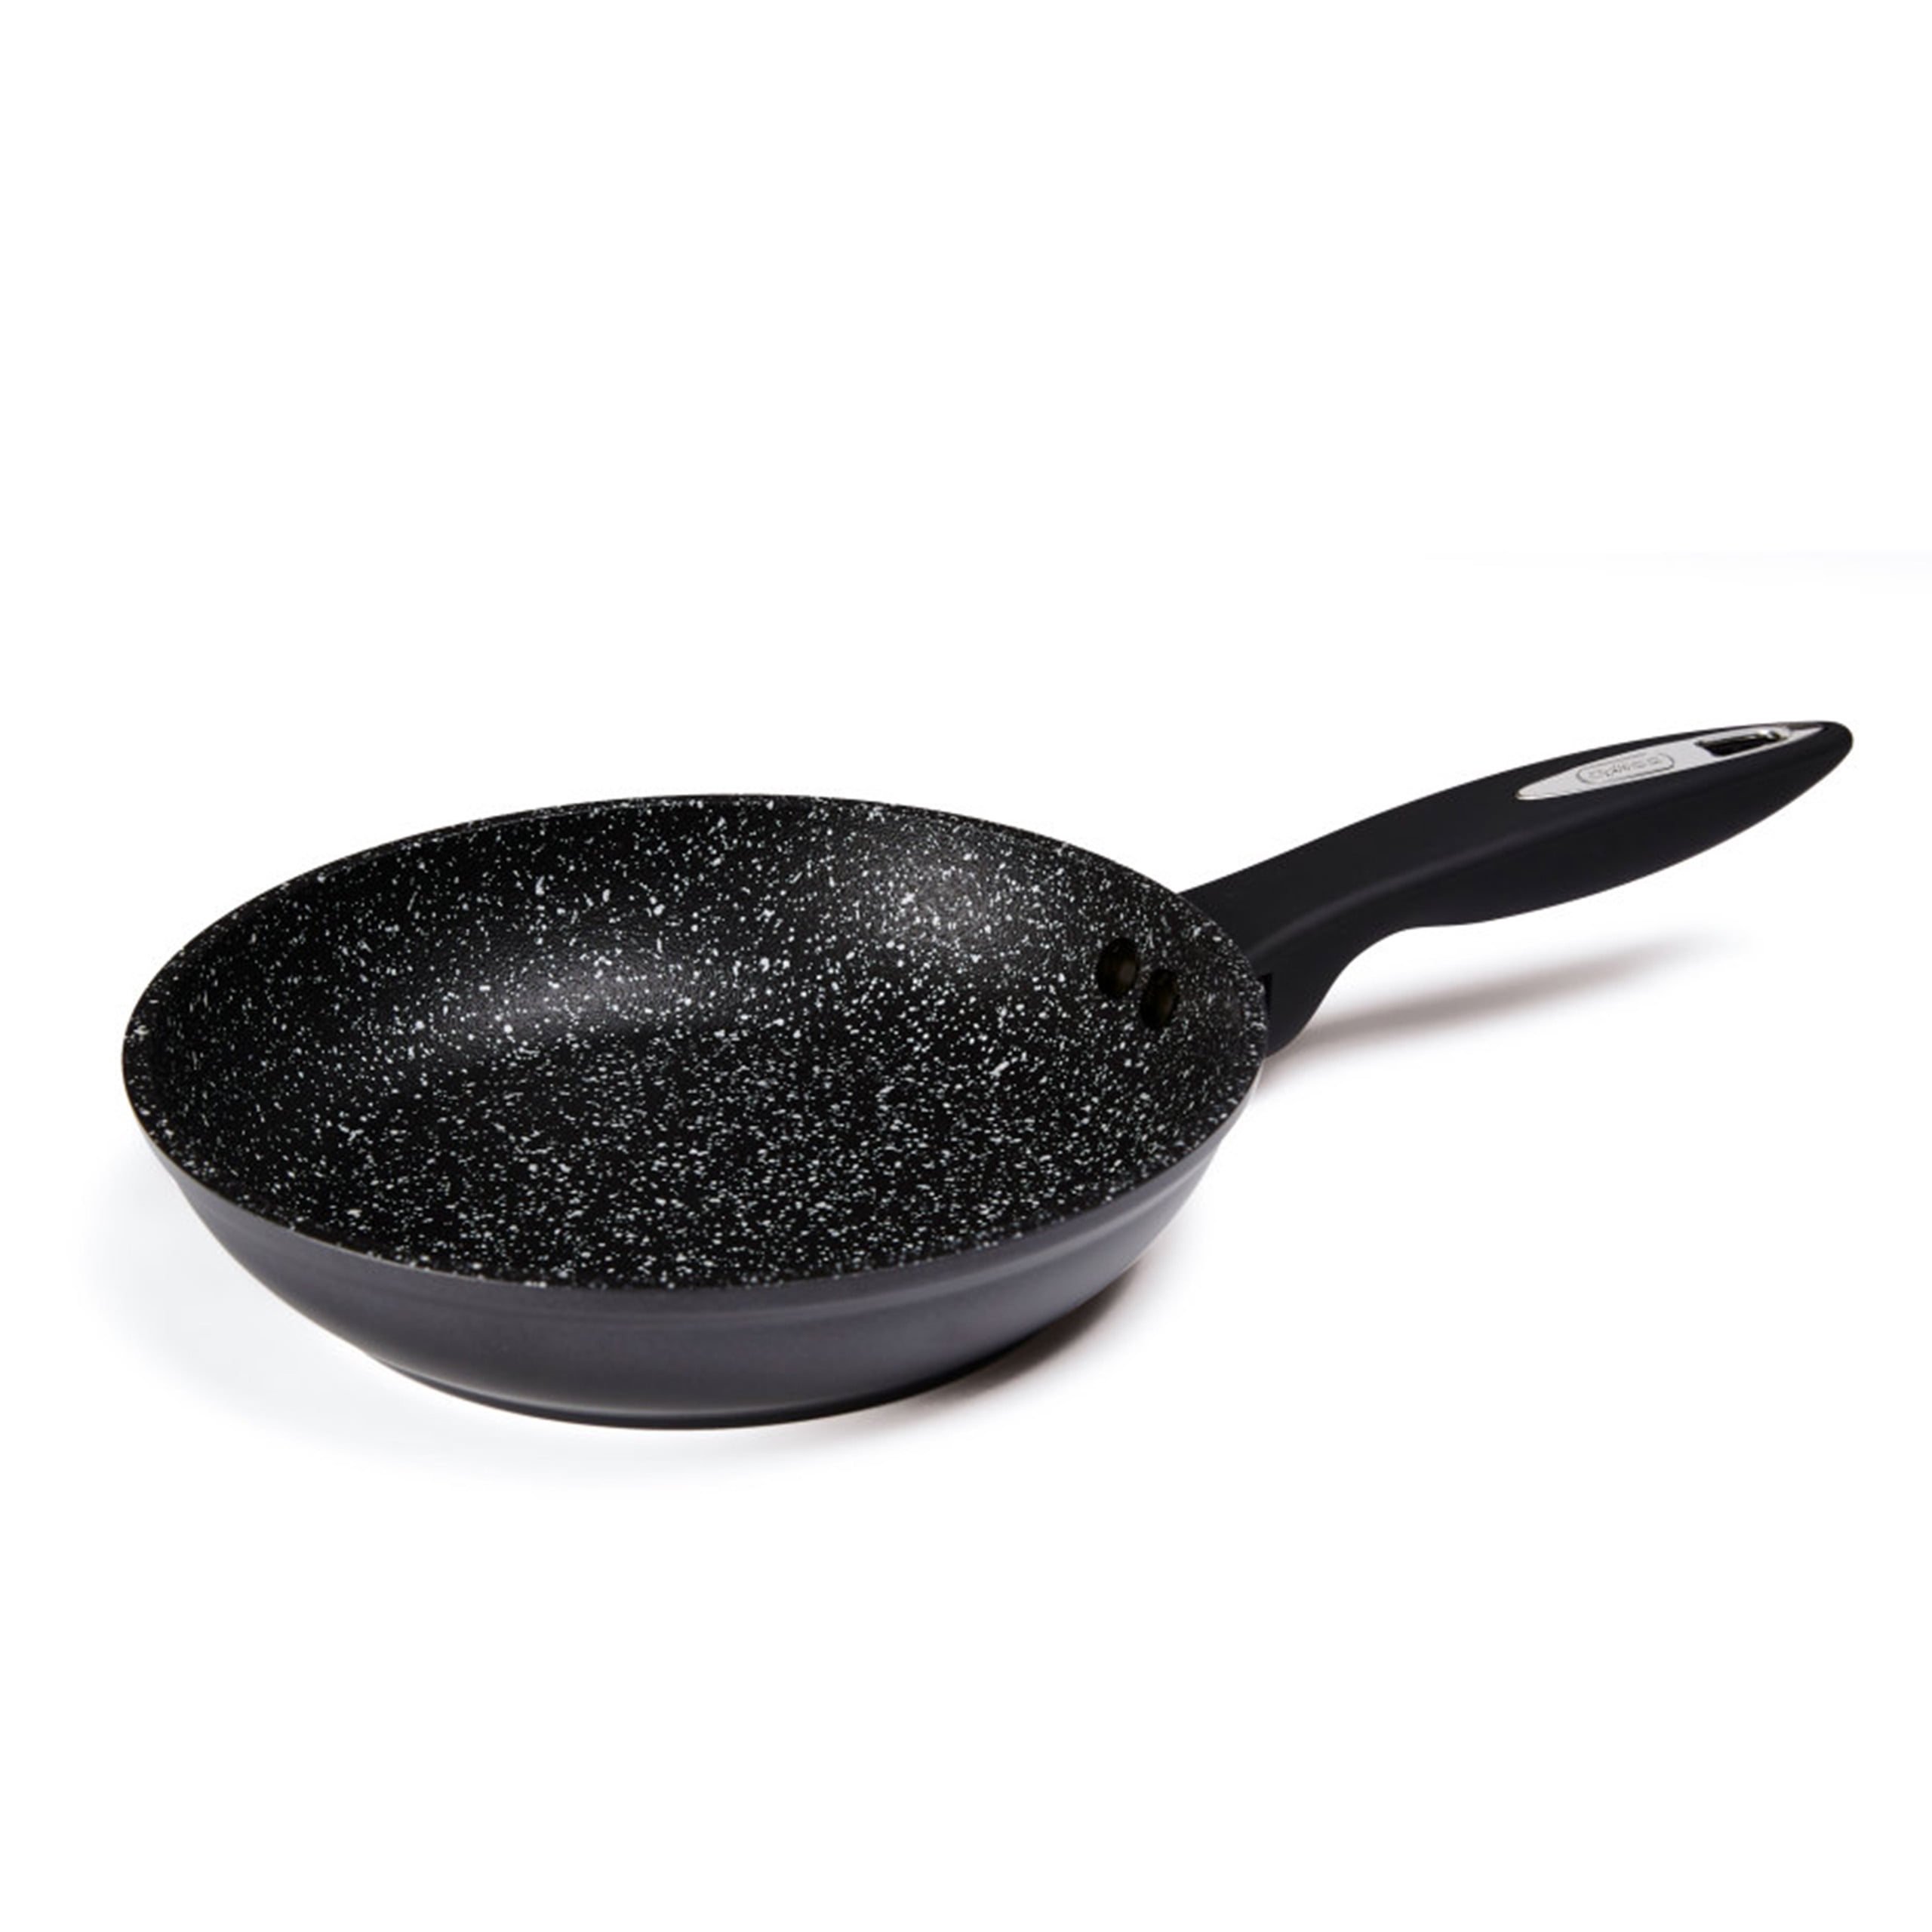 Joie Mini Nonstick Egg and Fry Pan, 4.5” 